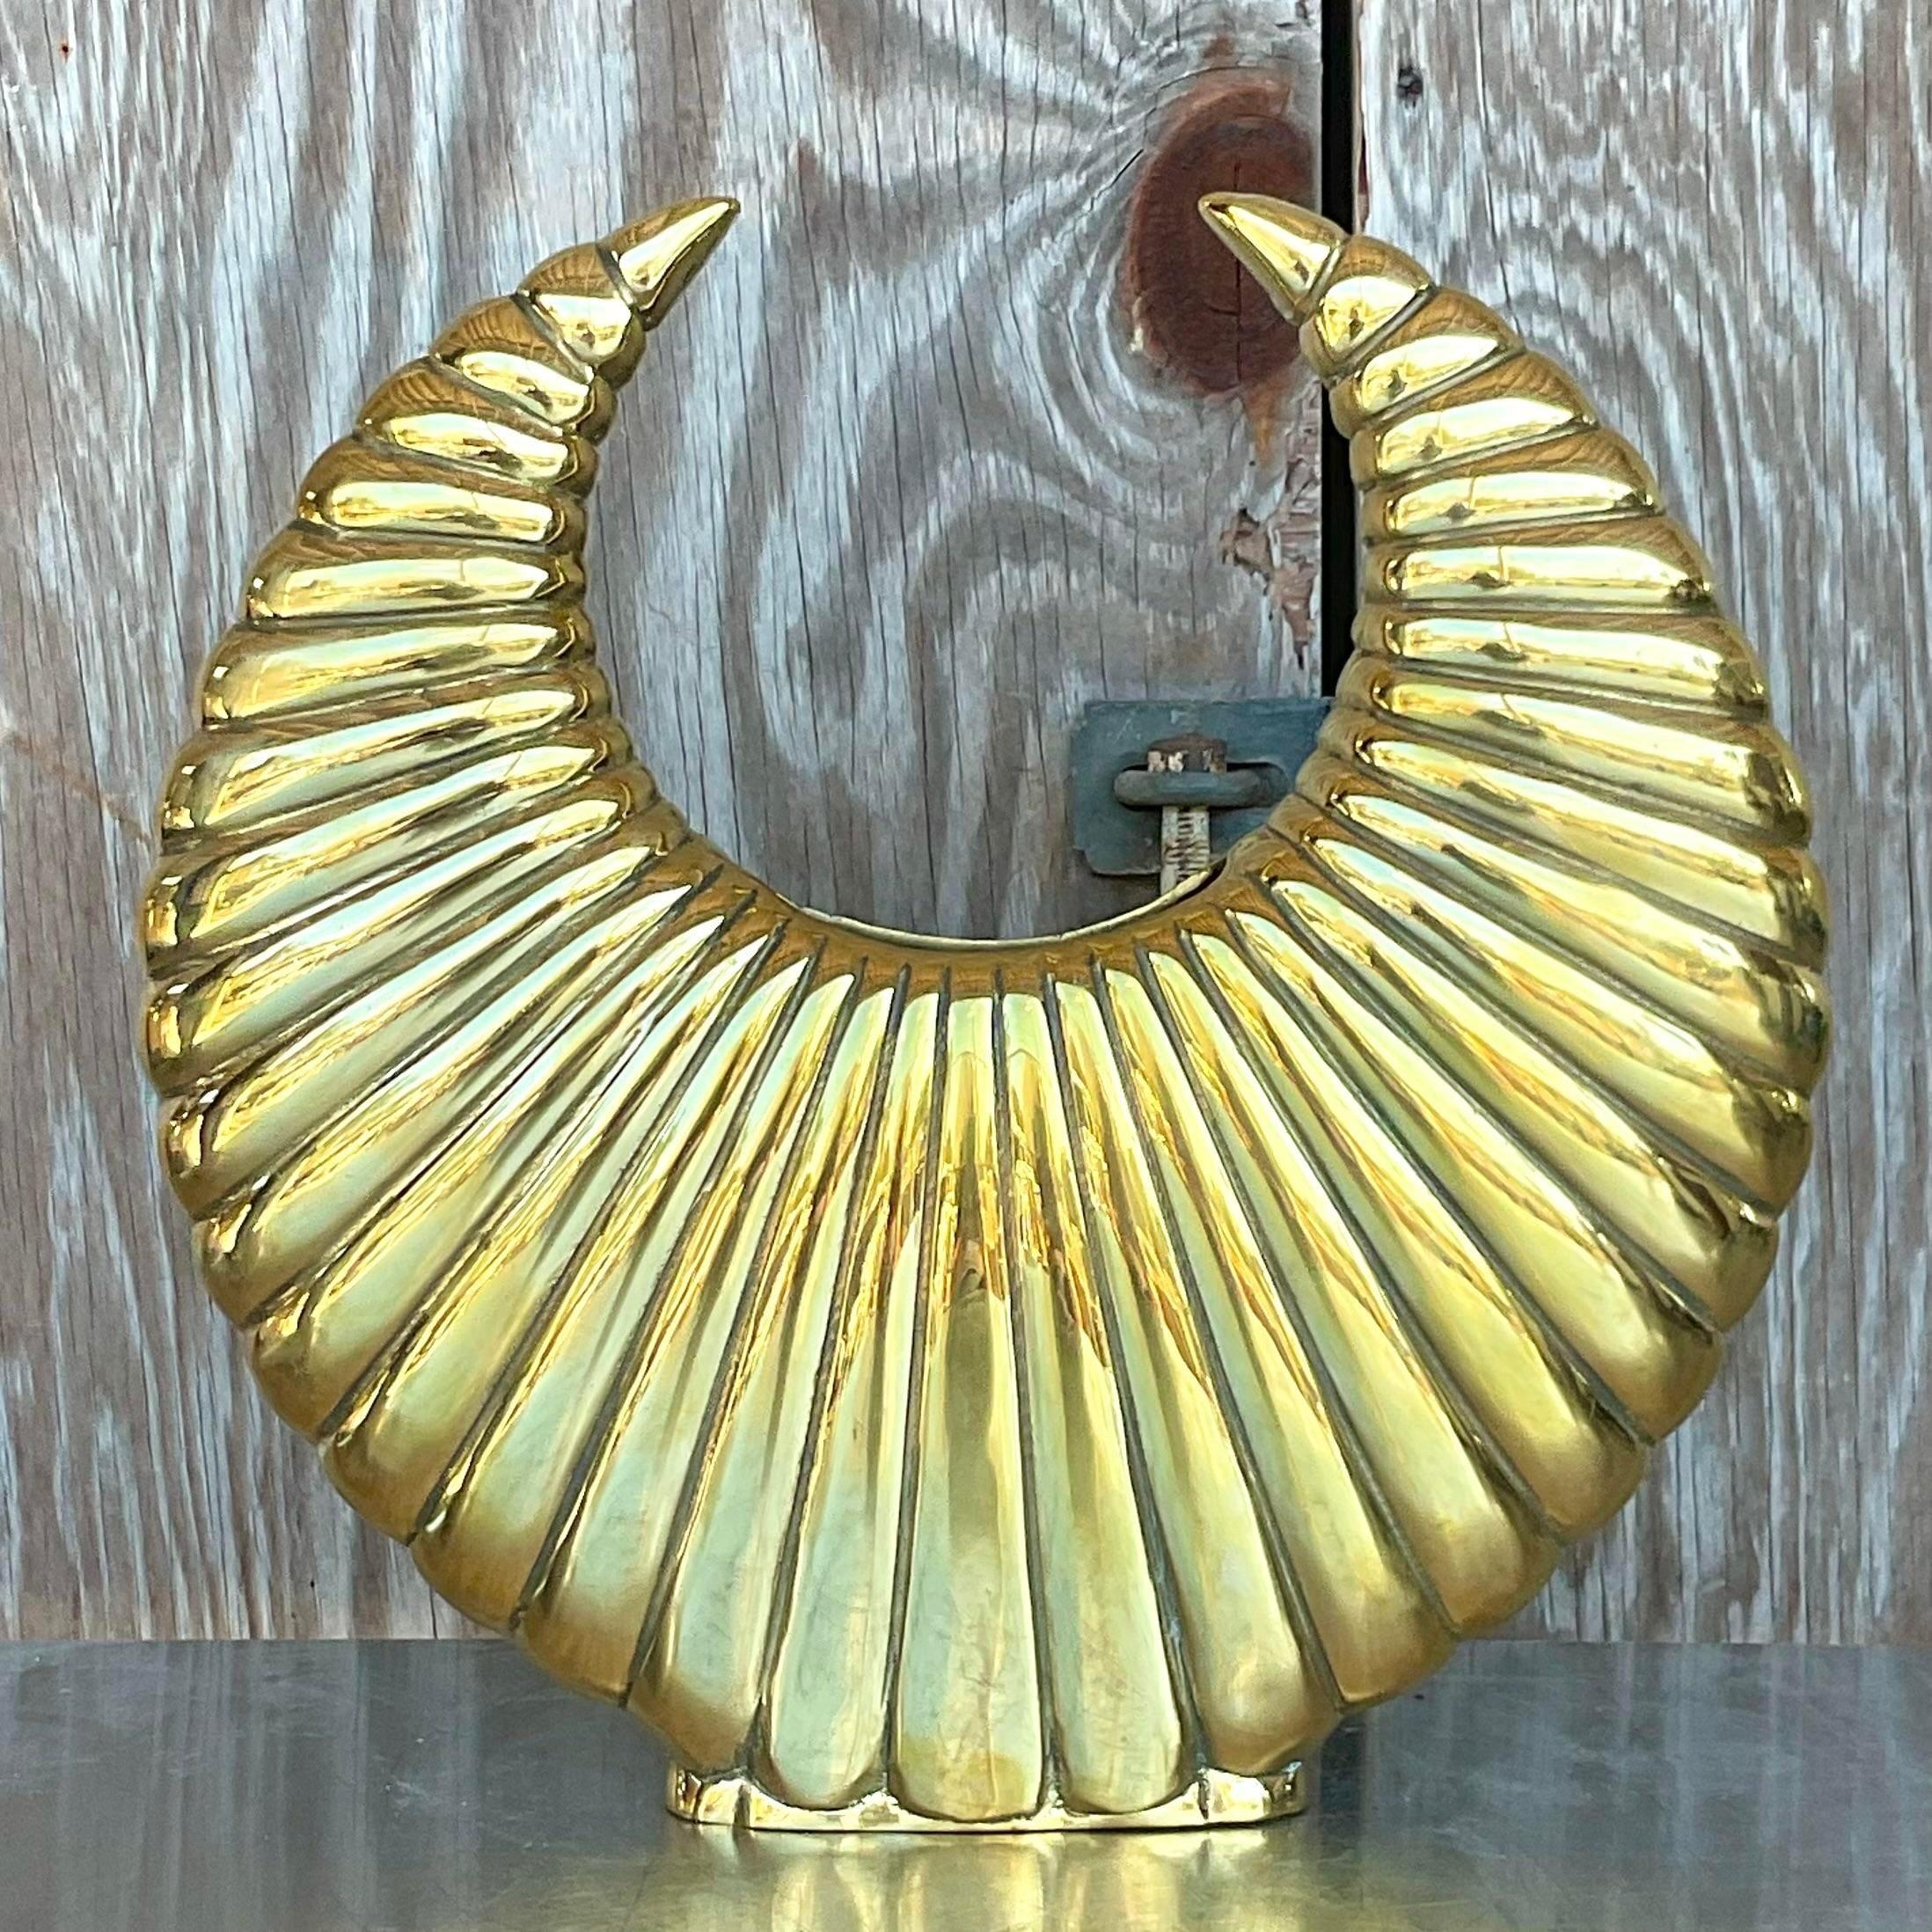 A fantastic vintage Boho vase. Chic channel tufted brass in a horse shape. Acquired from a Palm Beach estate.